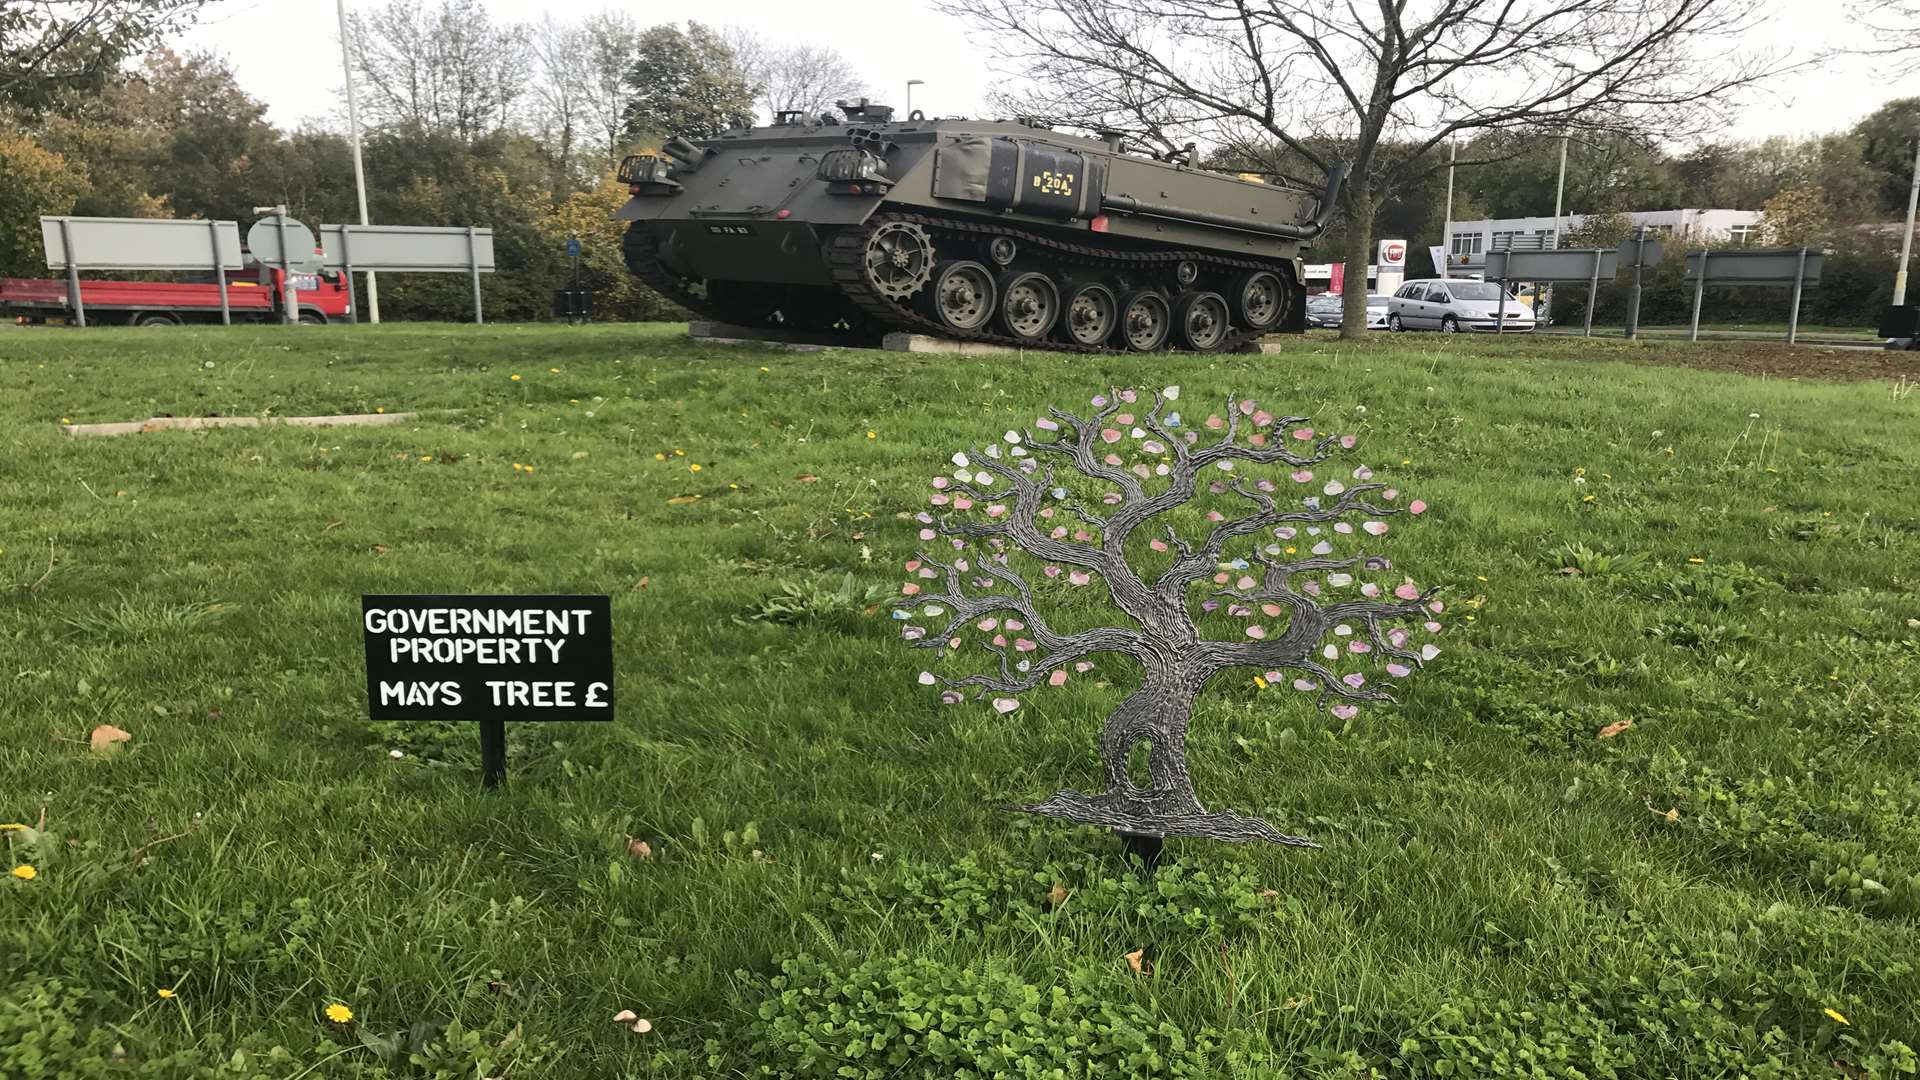 The statue and sign appeared on Tank roundabout over the weekend